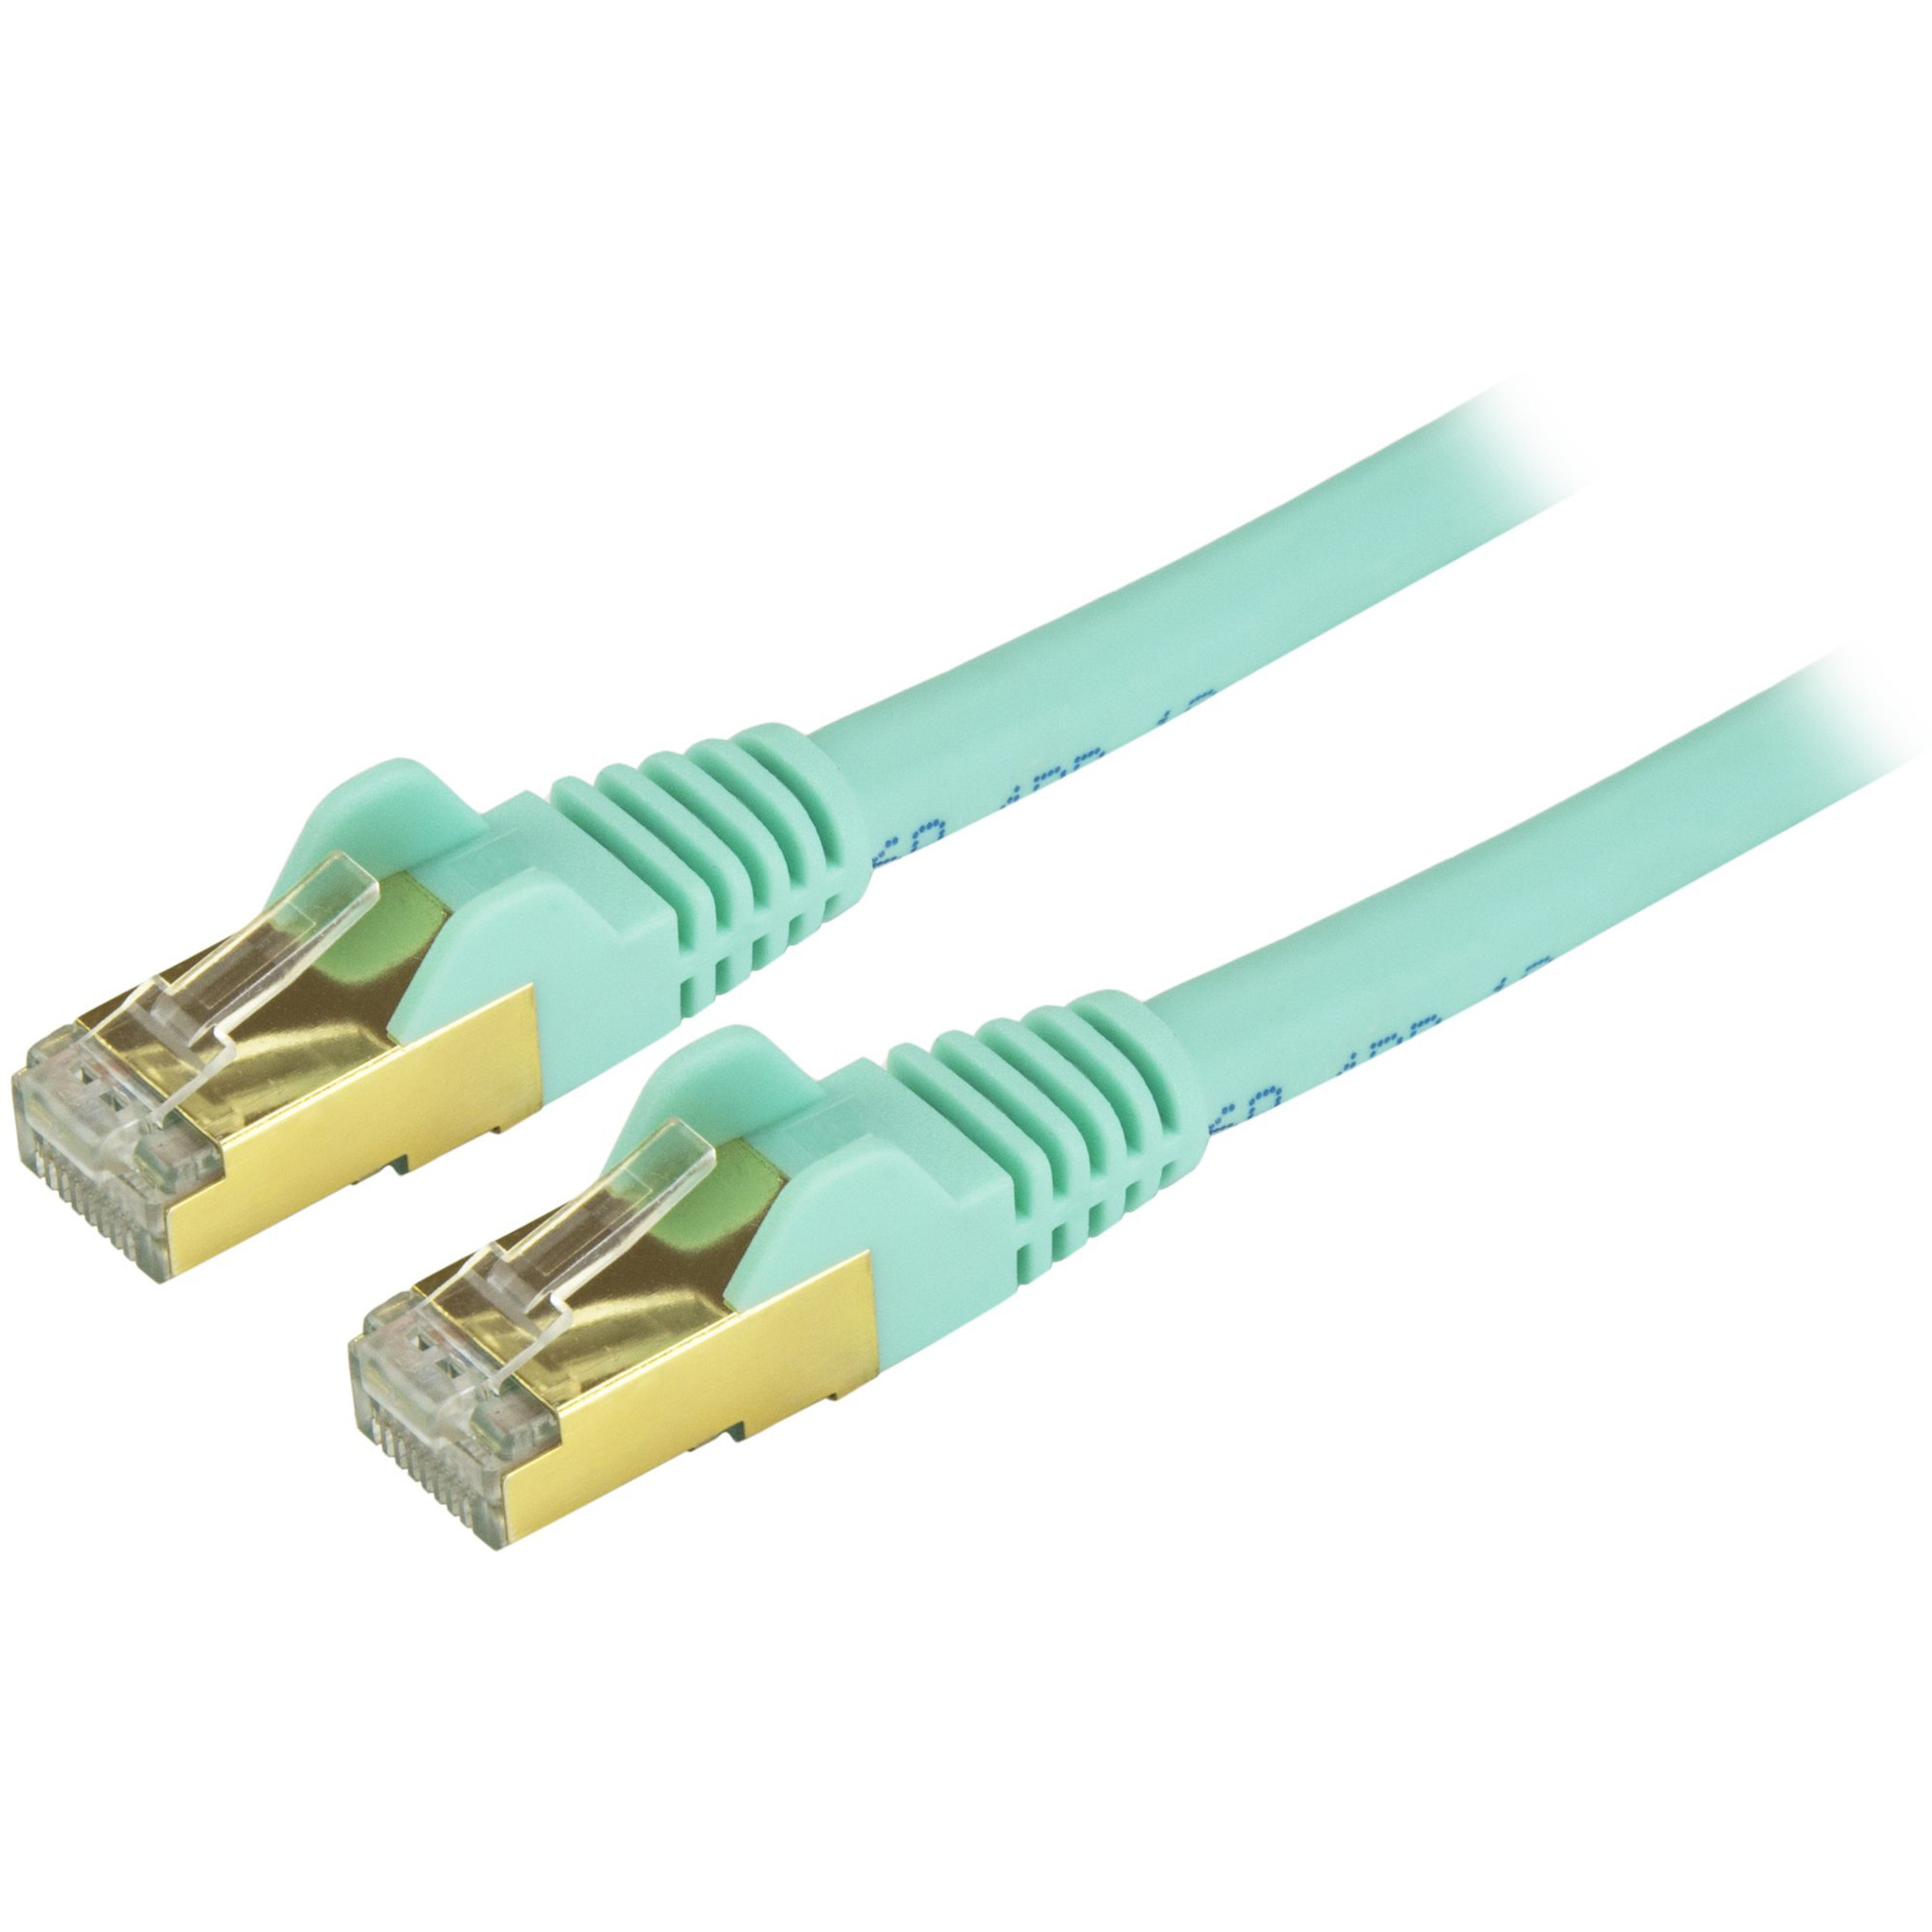 Startech .com 30ft CAT6a Ethernet Cable10 Gigabit Category 6a Shielded Snagless 100W PoE Patch Cord10GbE Aqua UL Certified Wiring/TIA -… C6ASPAT30AQ